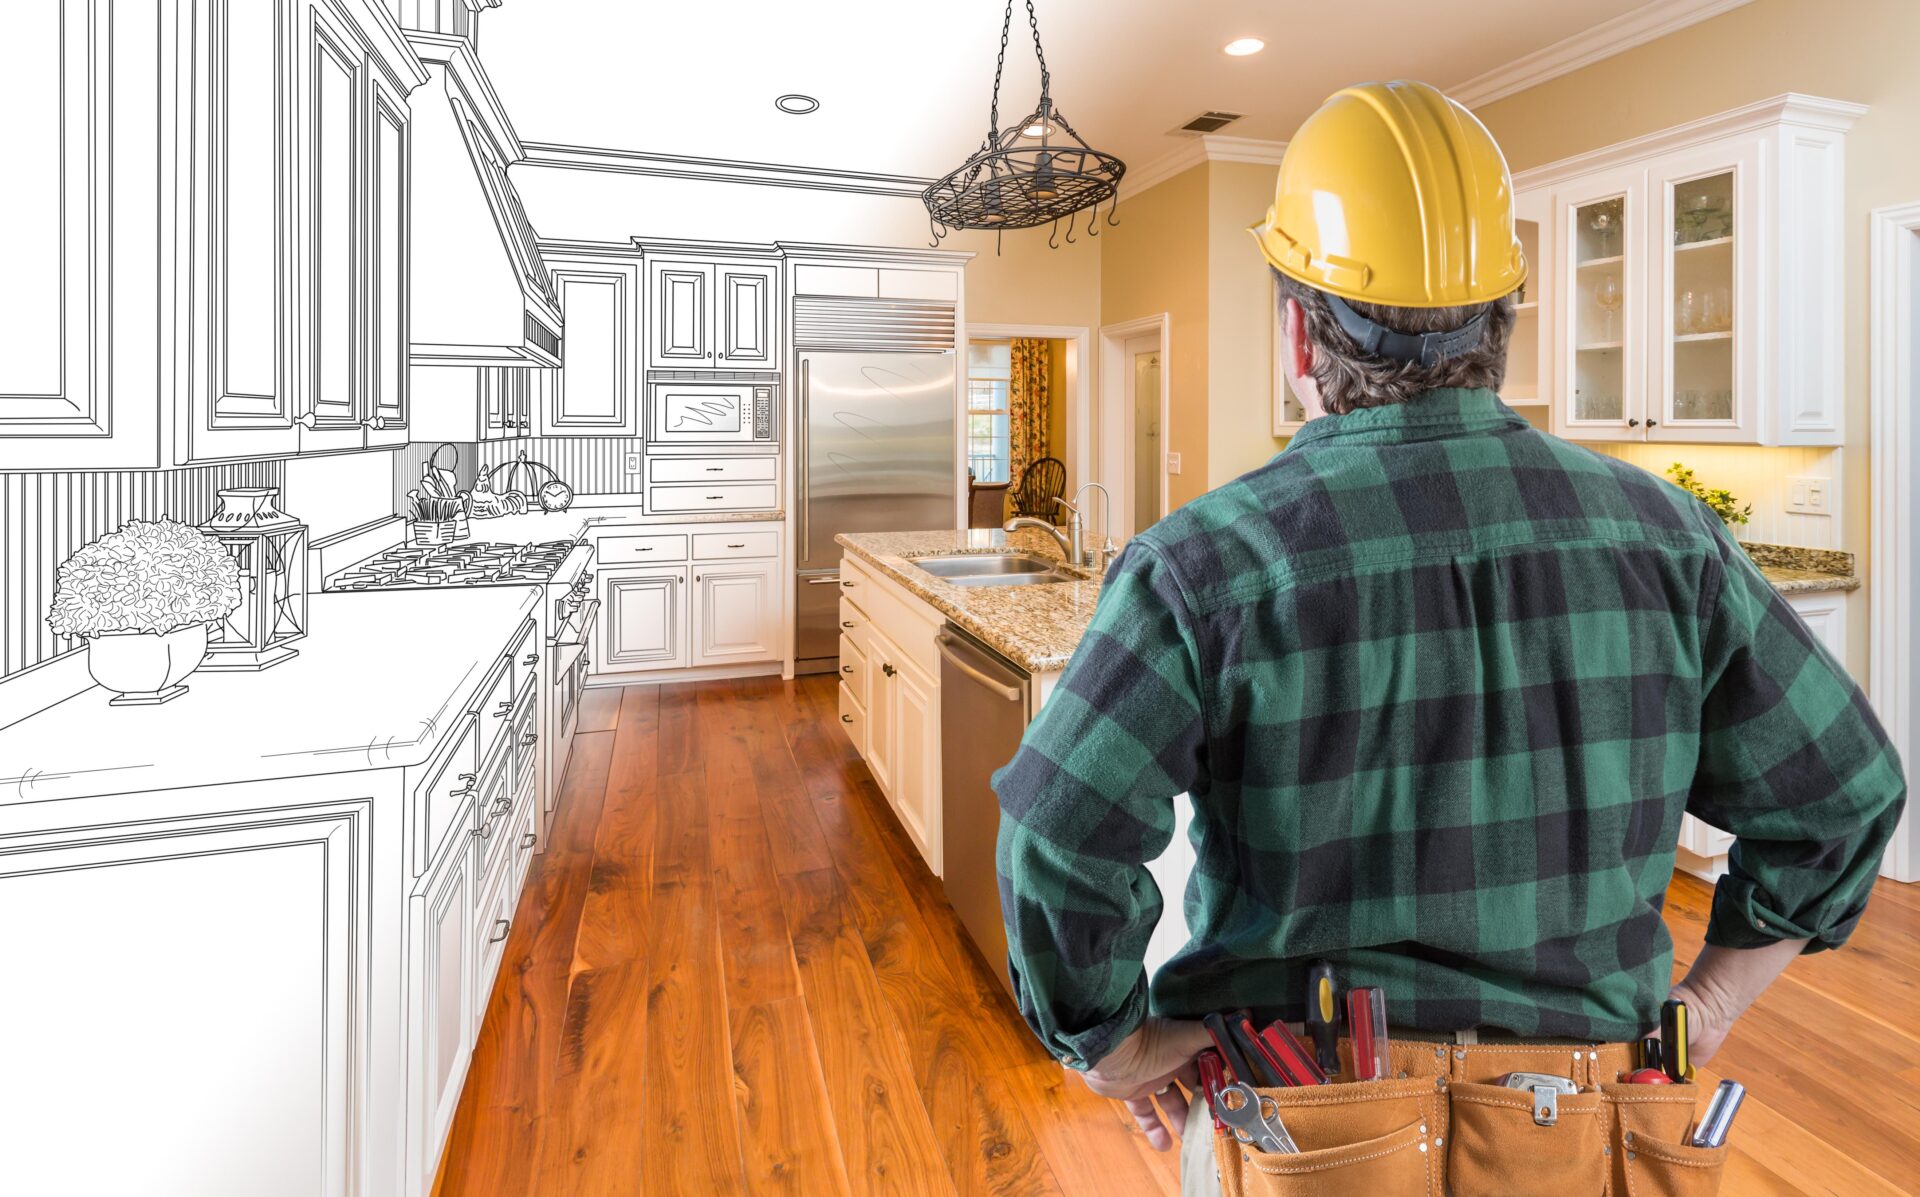 5 reasons to hire a professional home remodeling contractor